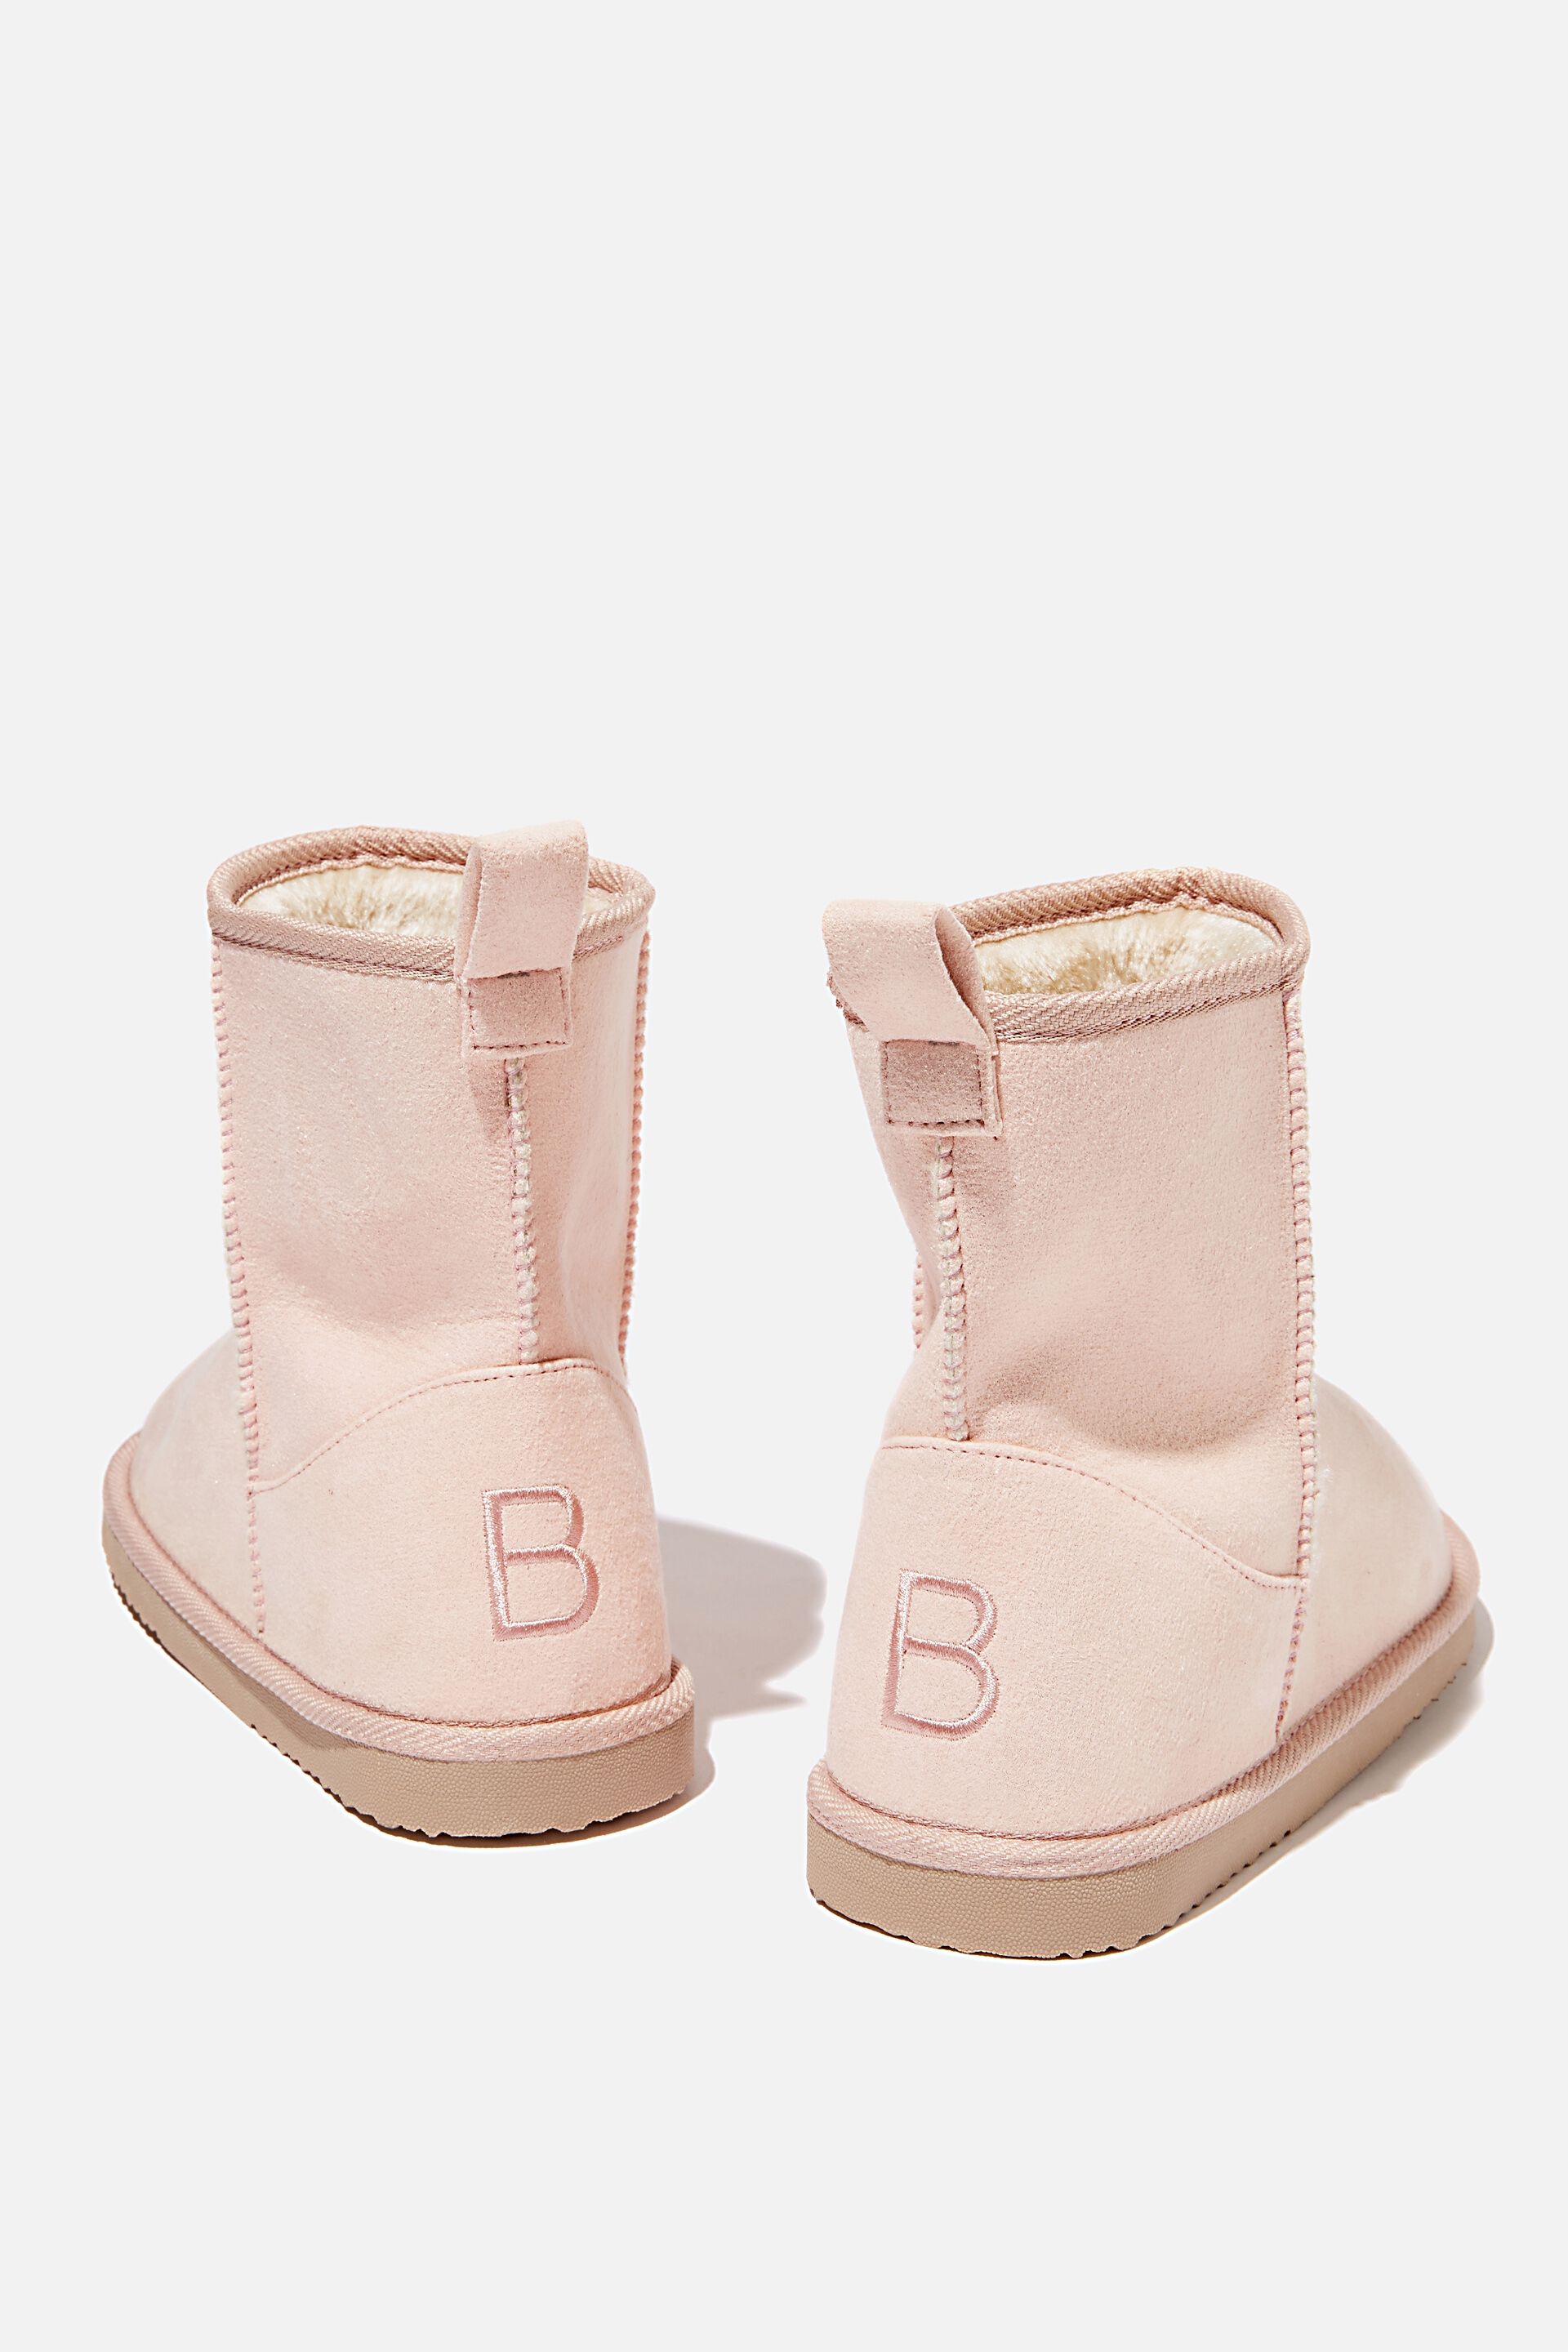 cotton on body ugg boots 